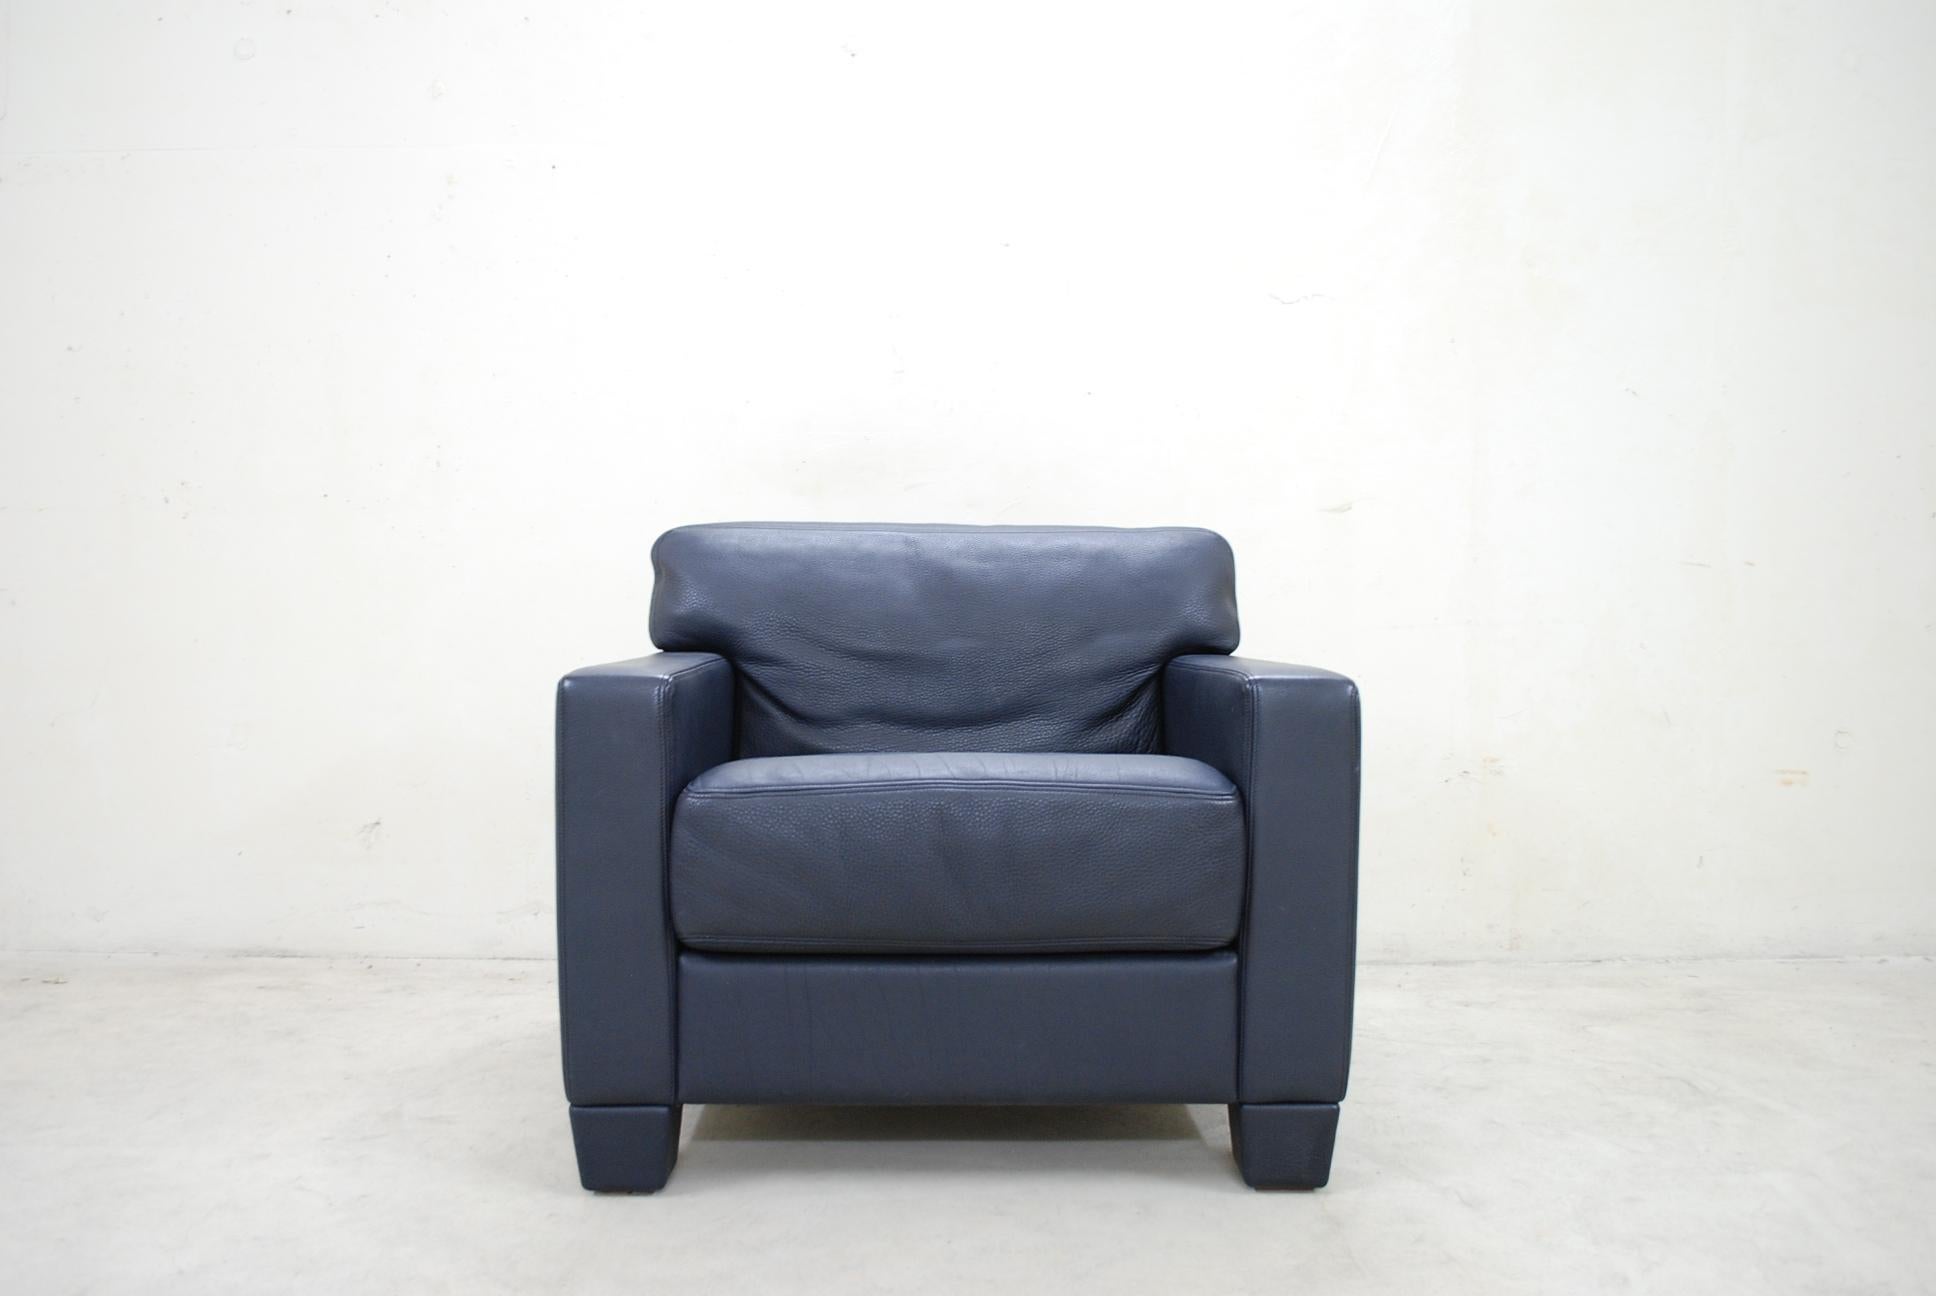 De Sede leather armchair DS 17.
The leather is the DS Club leather a thick Semianiline leather in dark blue.
Great comfort and a Classic timeless design by De Sede.
In a very good condition.
 

.